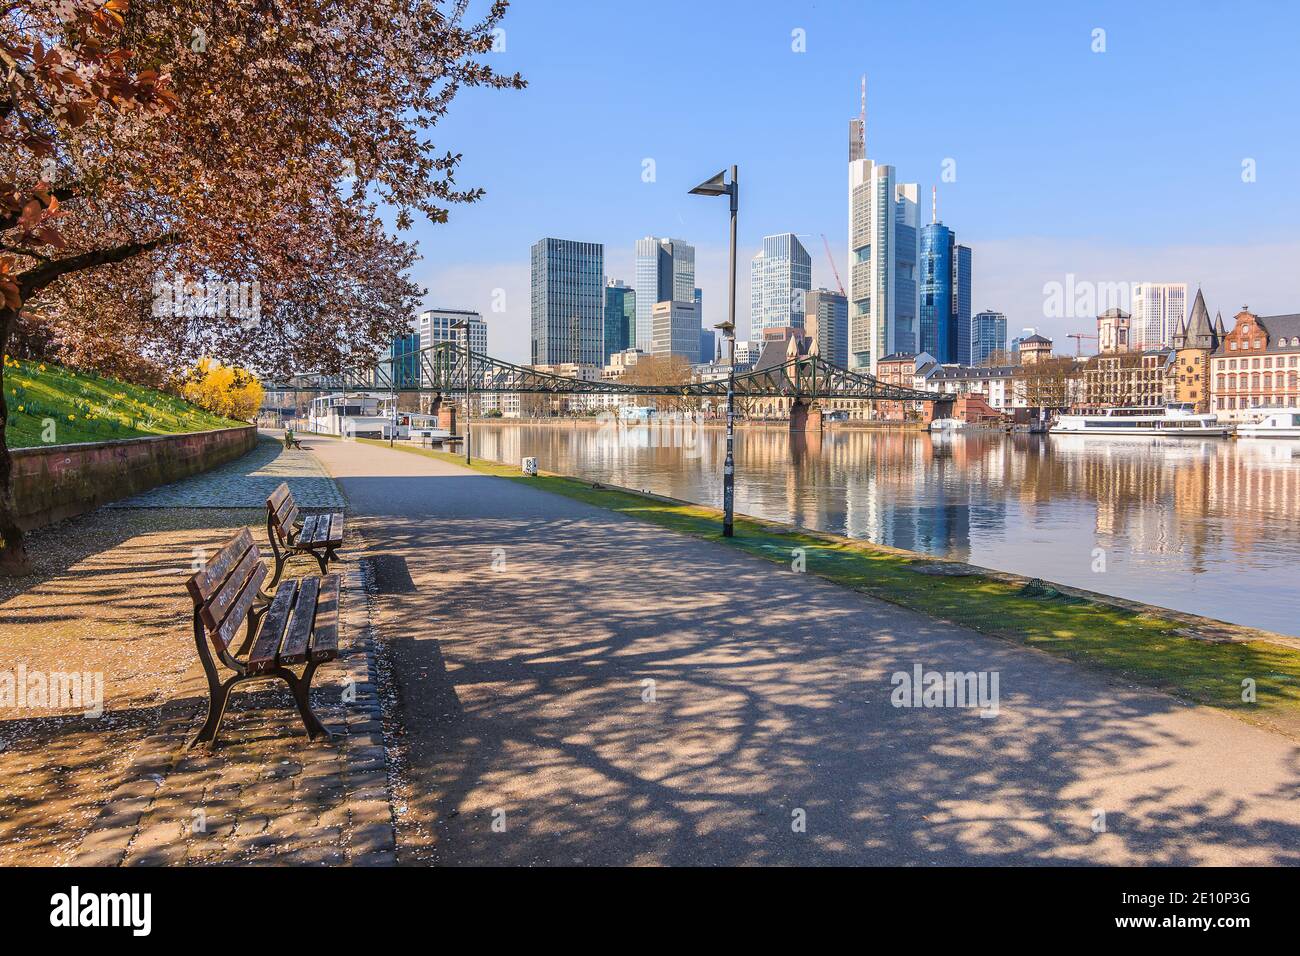 Skyscrapers in the financial district with reflections. Park and path on the banks of the Main on the river Main in Frankfurt. Tree with flowers and b Stock Photo